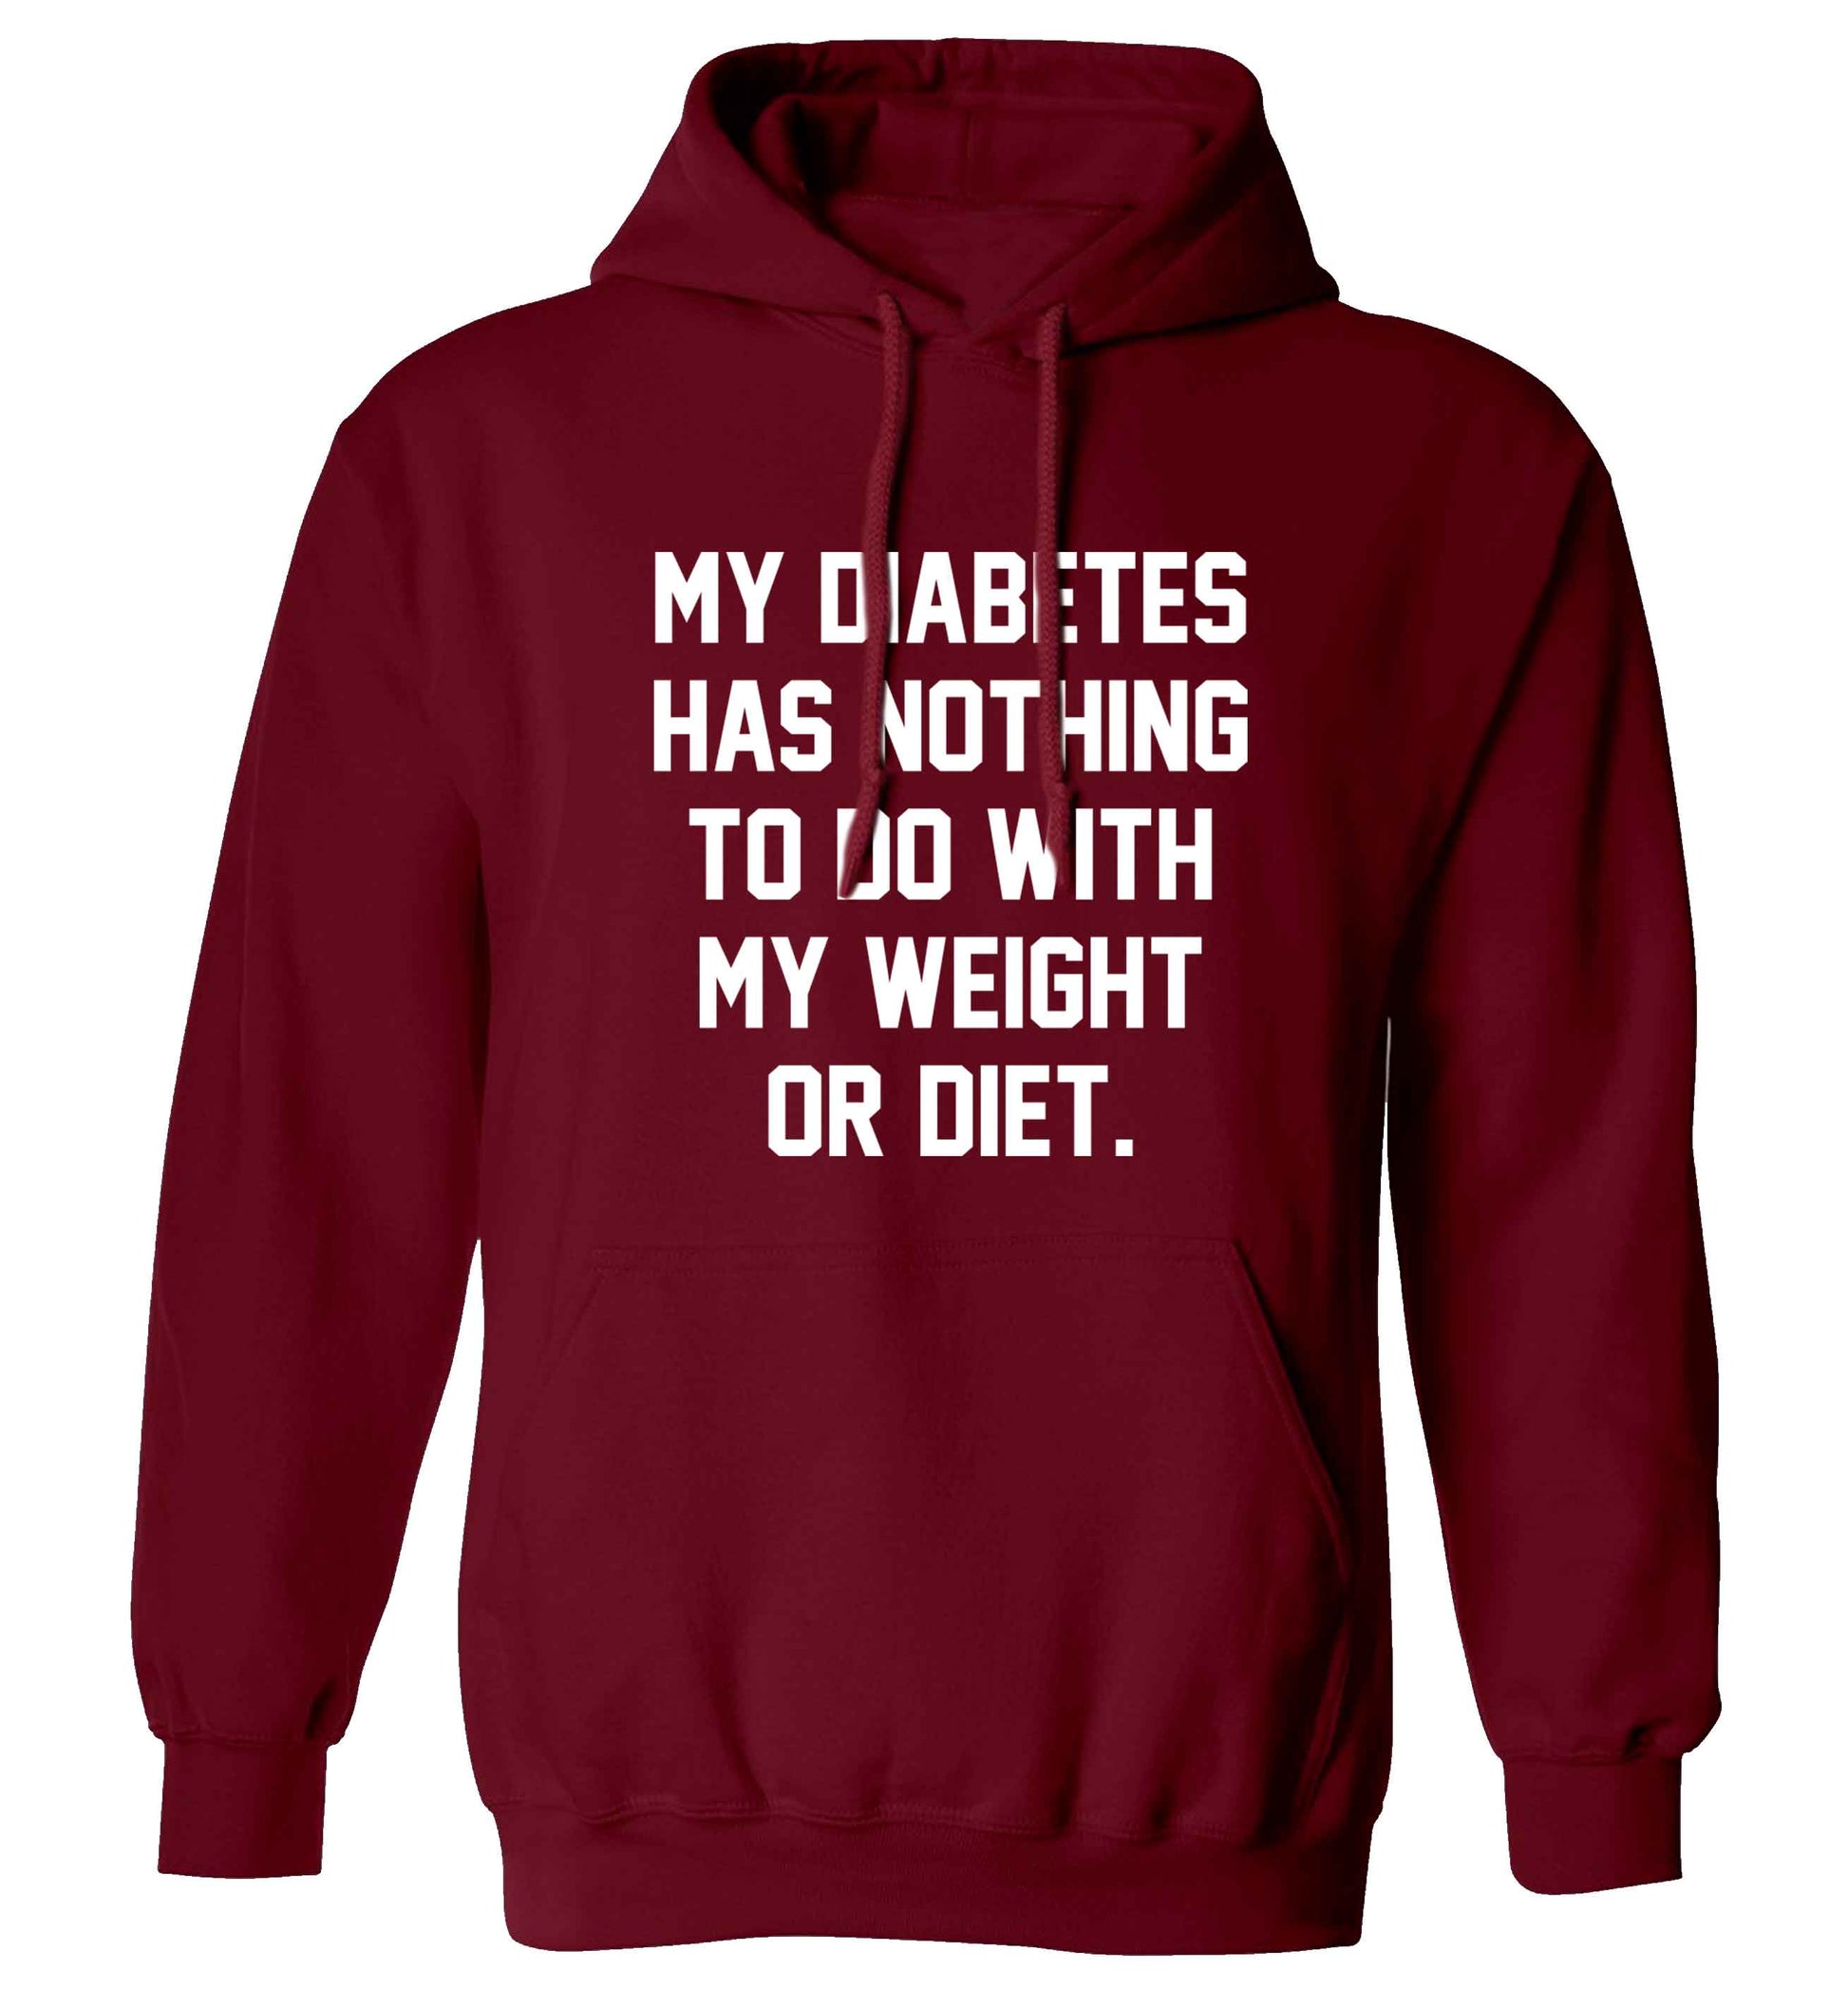 My diabetes has nothing to do with my weight or diet adults unisex maroon hoodie 2XL